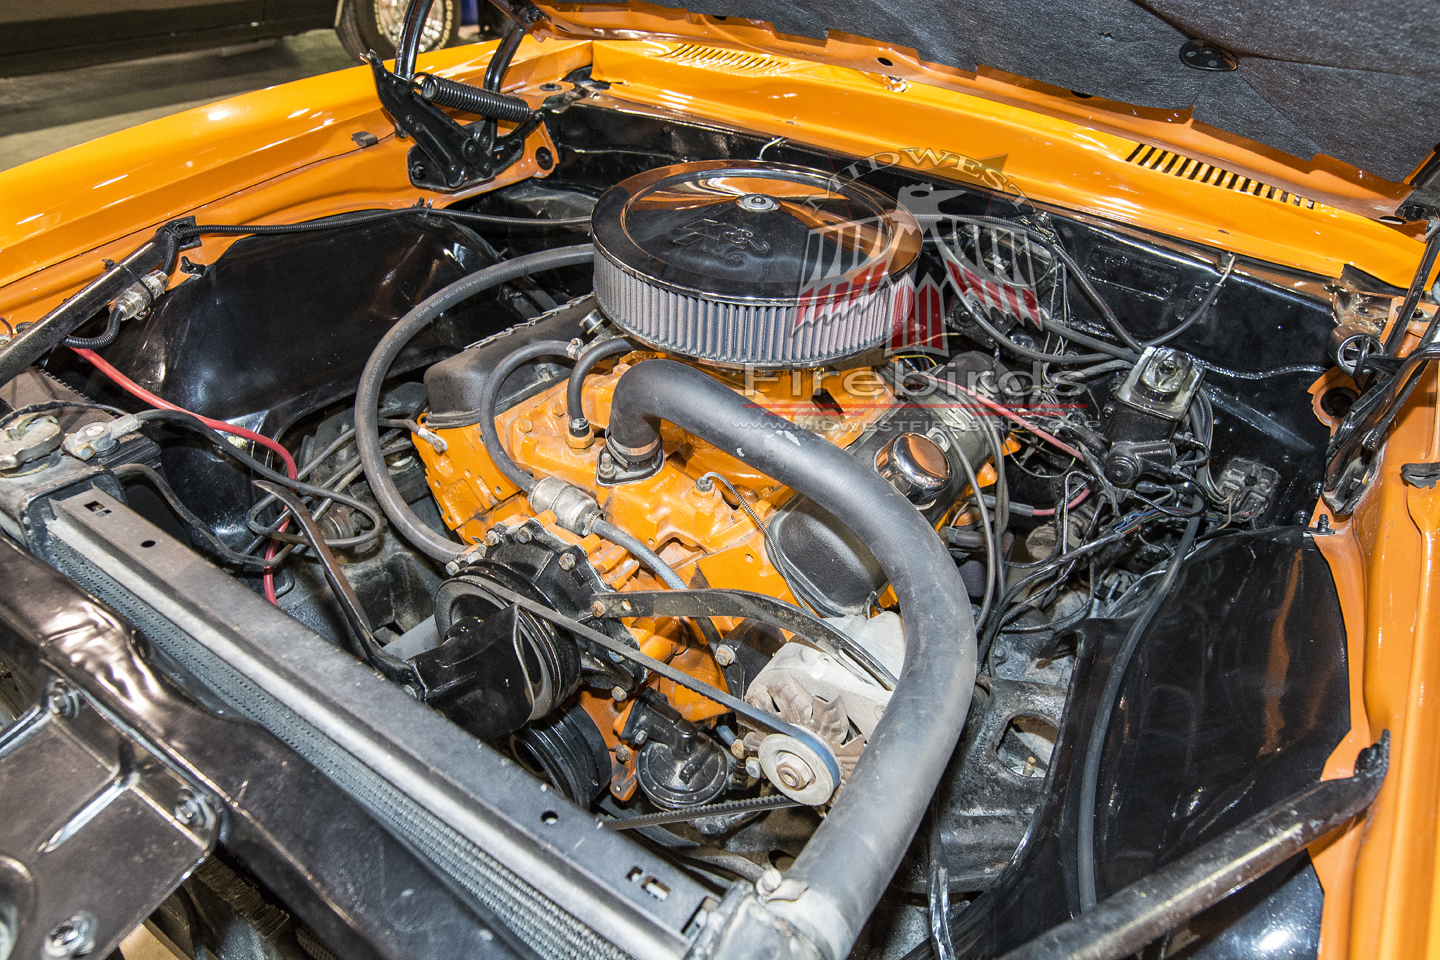 This orange 1967 Pontiac Firebird coupe was on display at the 2014 World of Wheels car show.